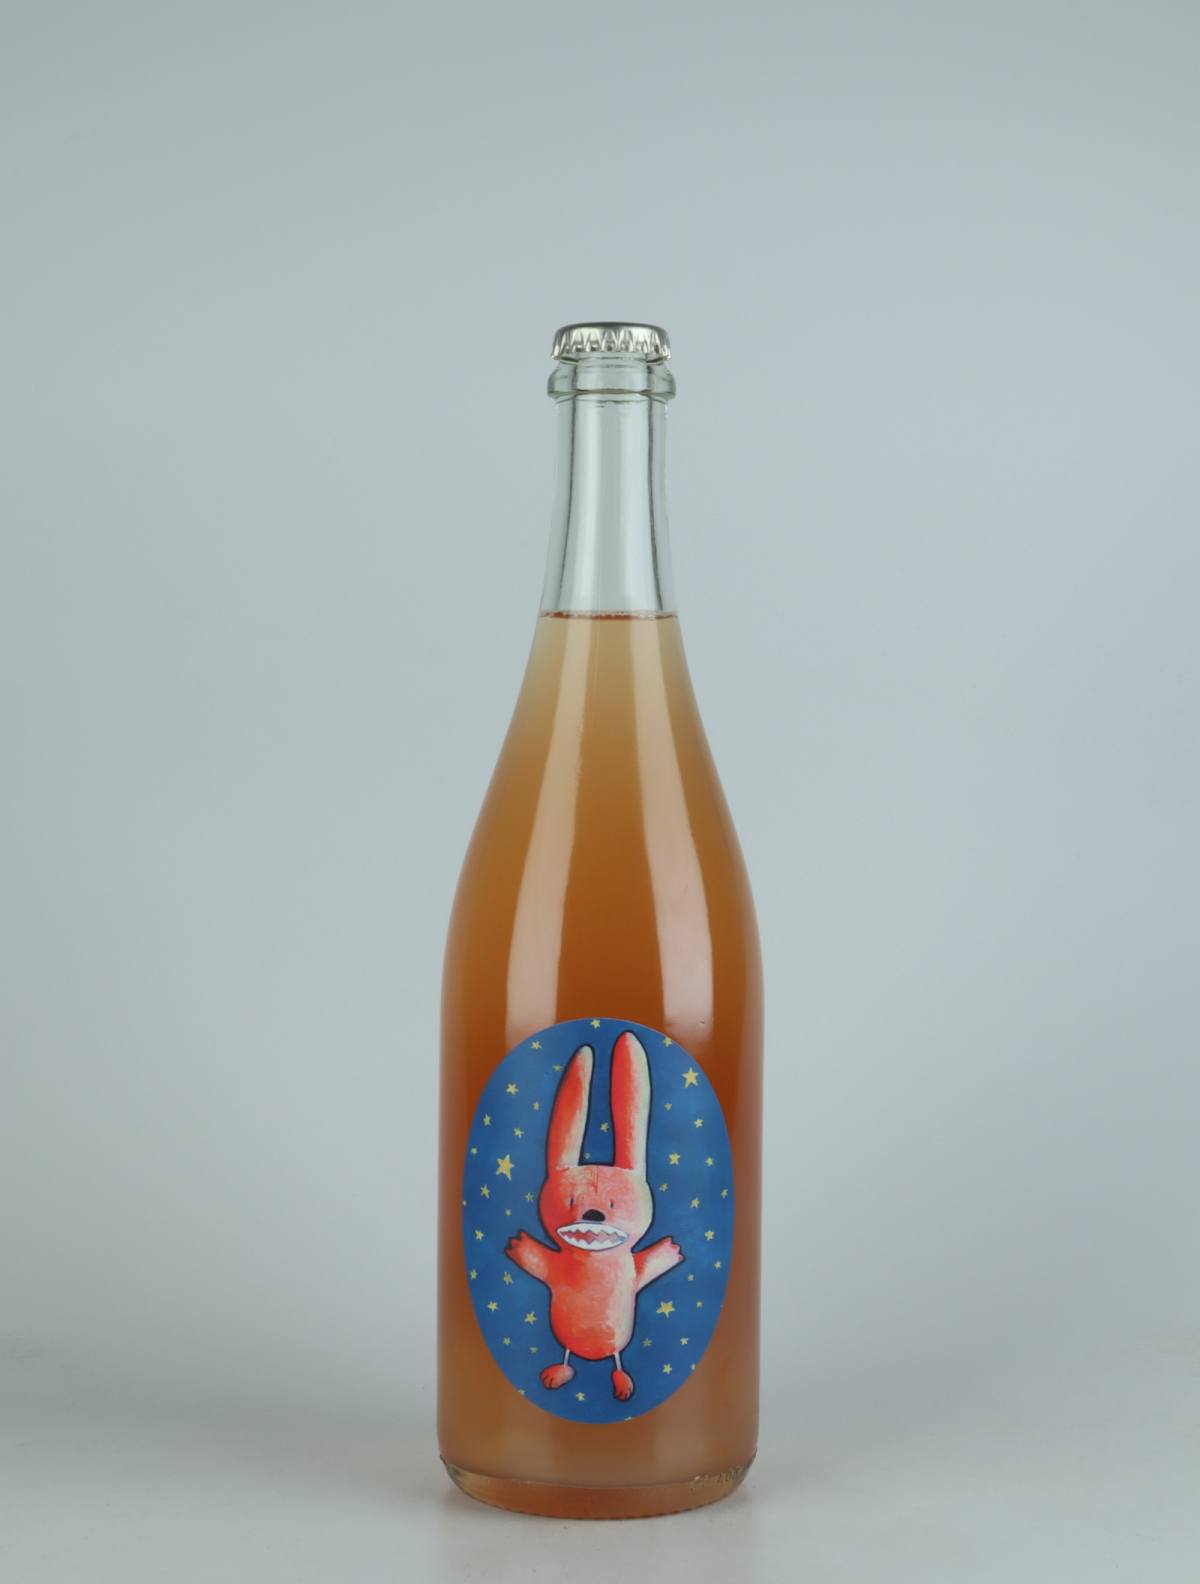 A bottle 2021 Astro Bunny Sparkling from Wildman, Adelaide Hills in Australia